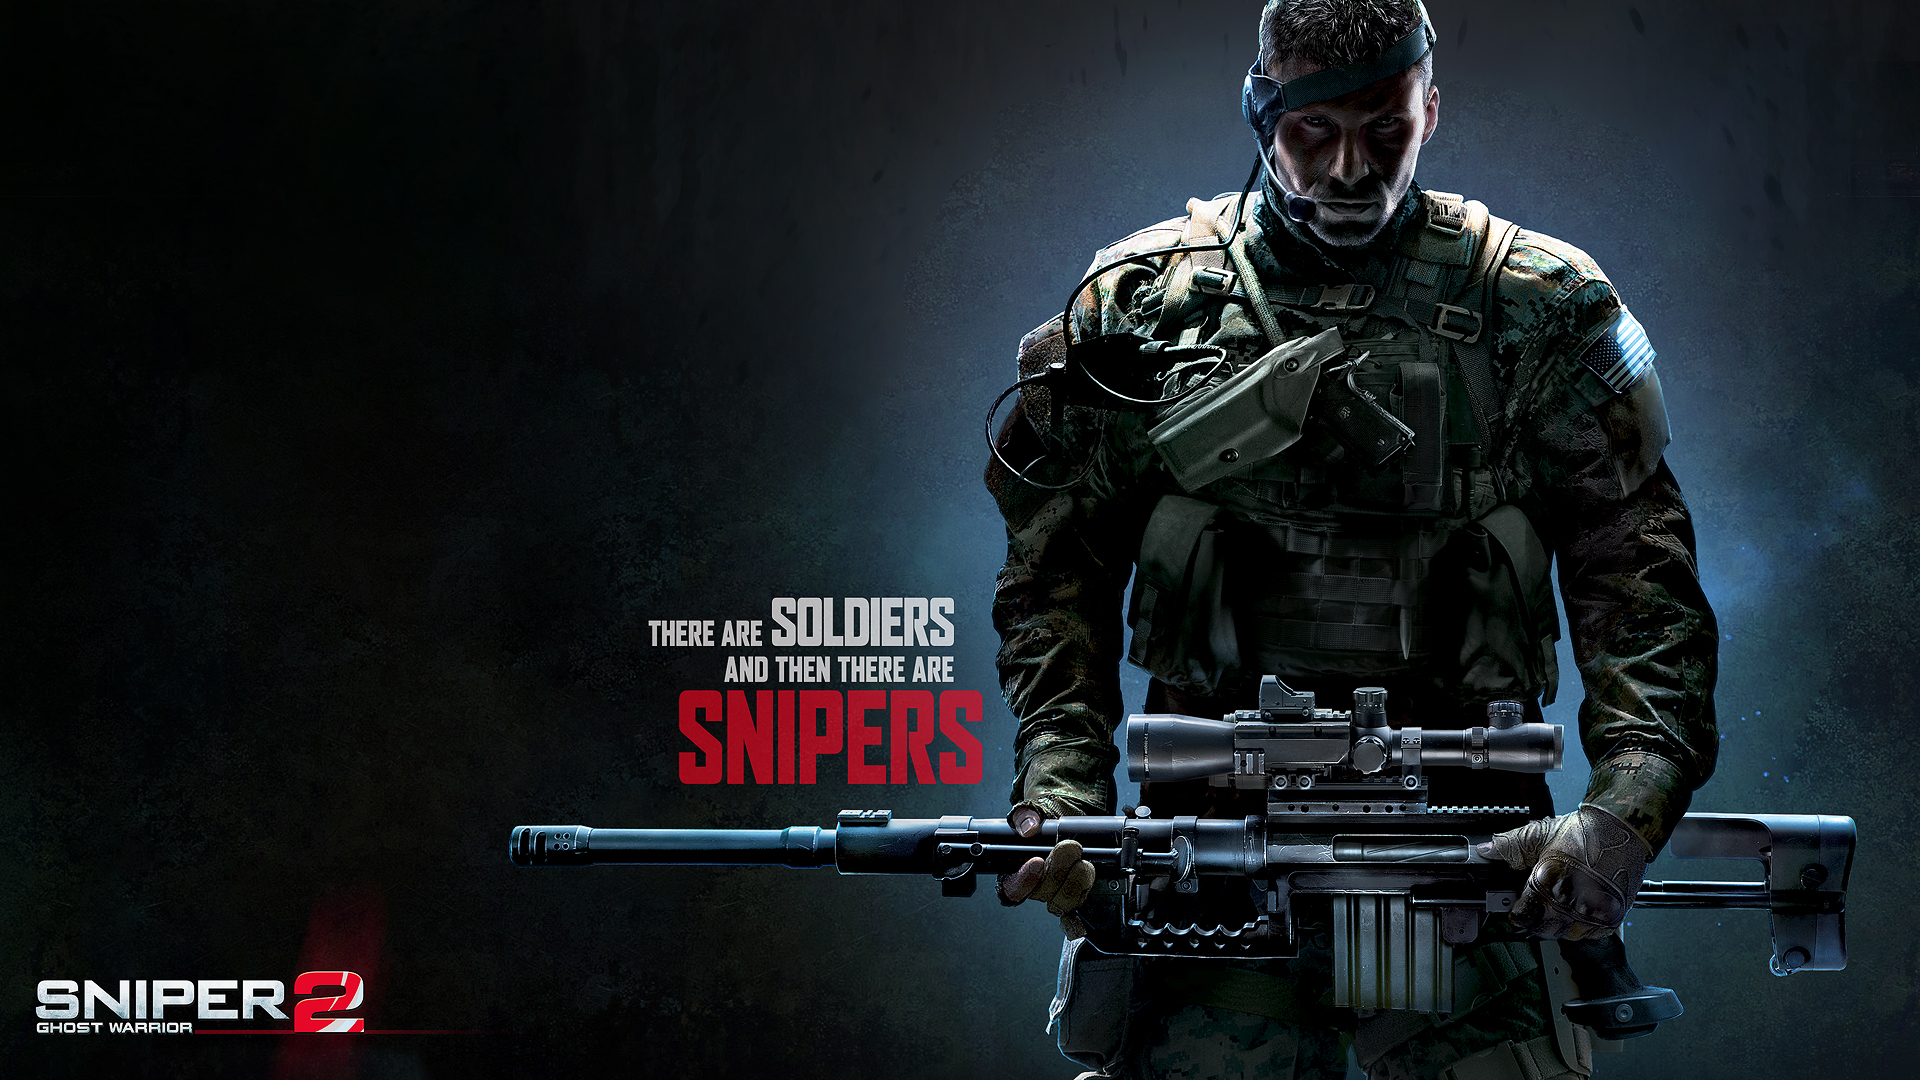 sniper ghost warrior 2 full version free download for pc